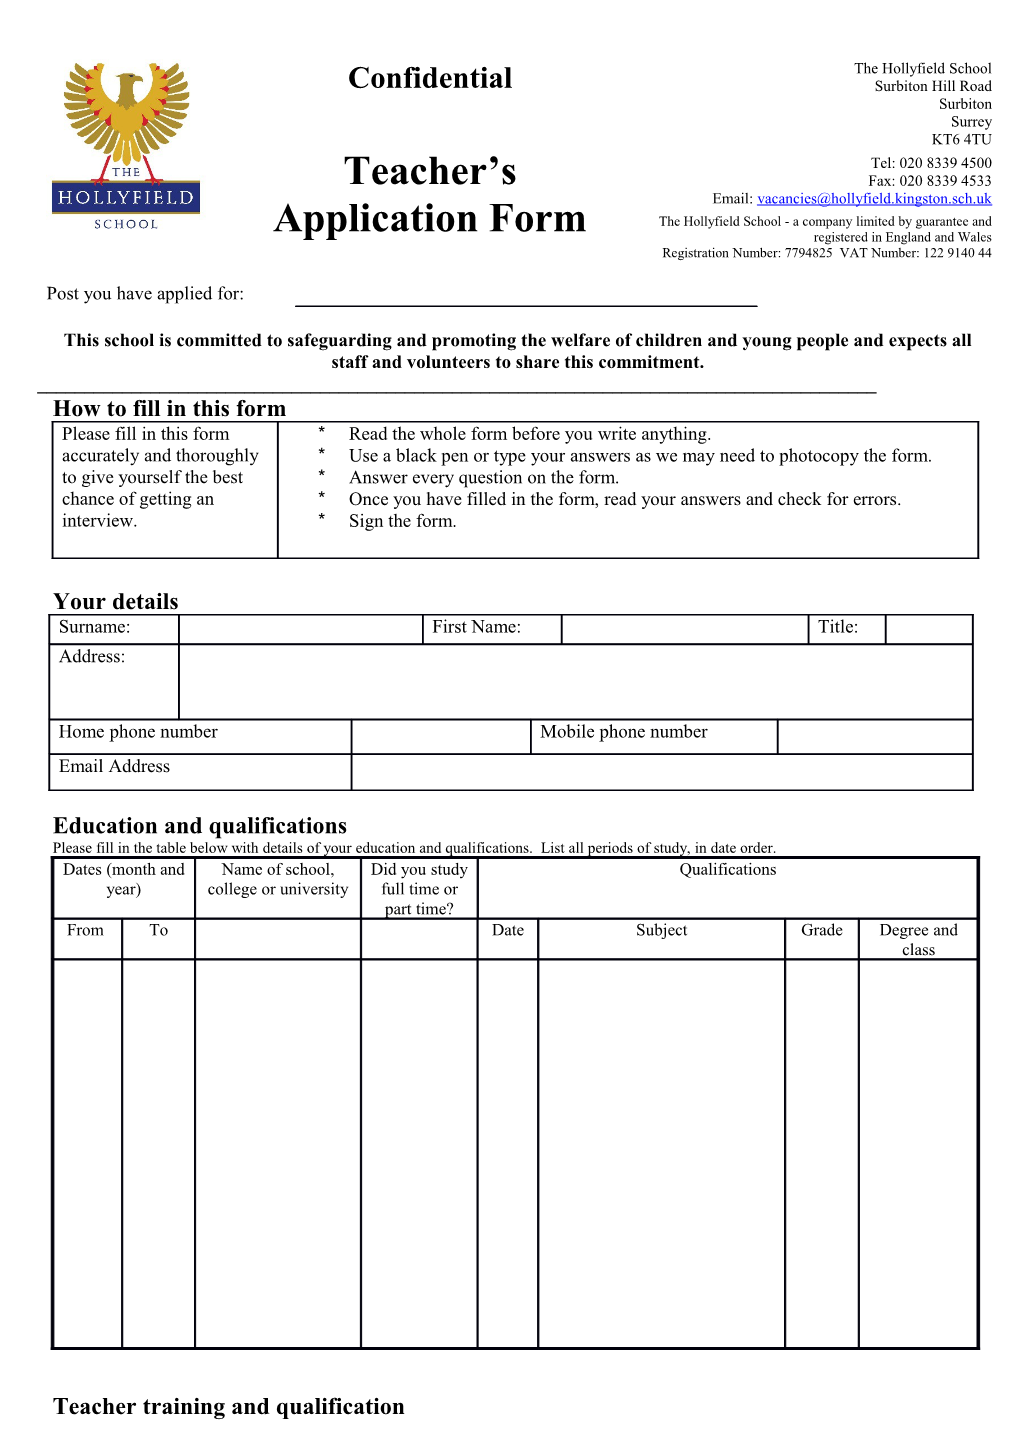 How to Fill in This Form